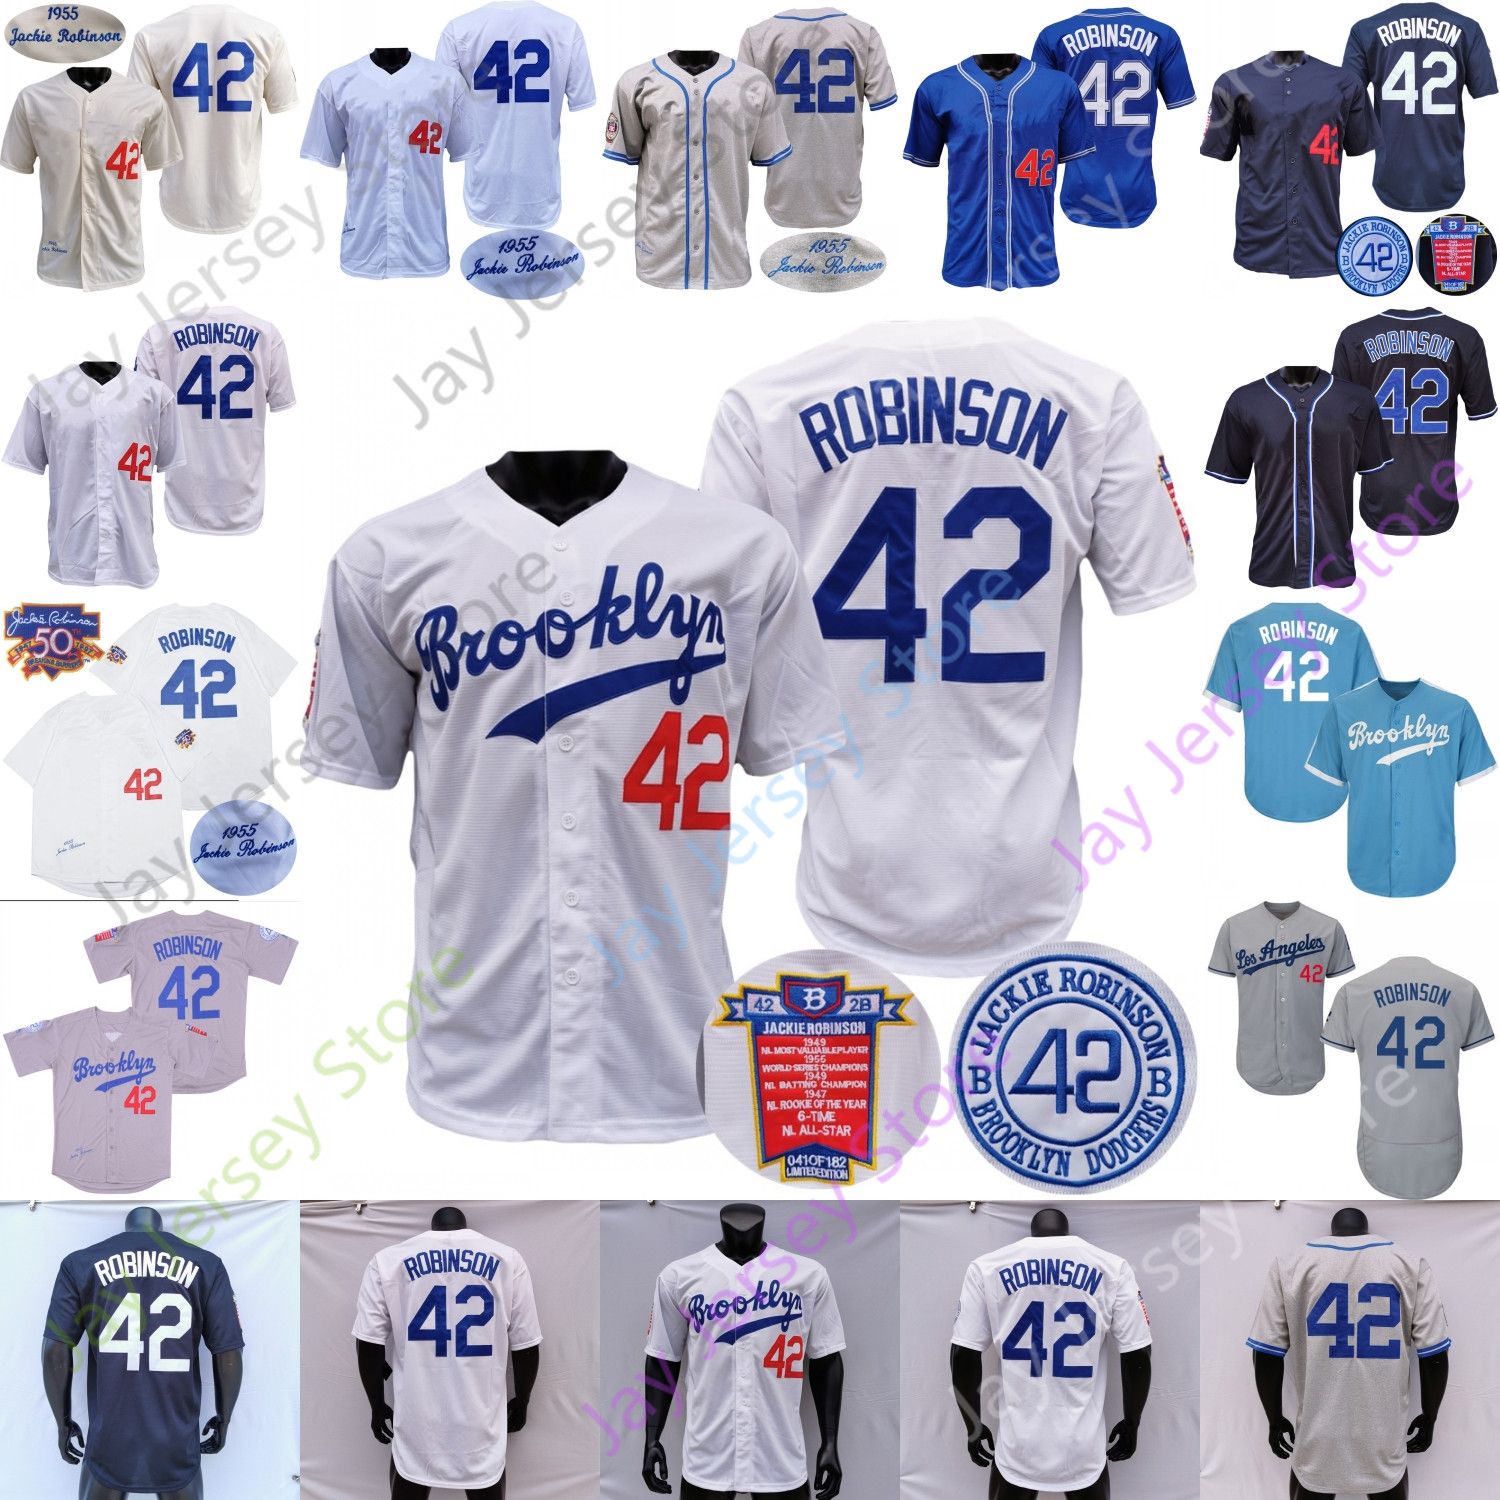 Jackie Robinson Jersey Vintage 1955 Cream White Grey Blue Black Fashion  Hall Of Fame 50th 1st WS Patch Size S 3XL From James_jersey_store, $21.45